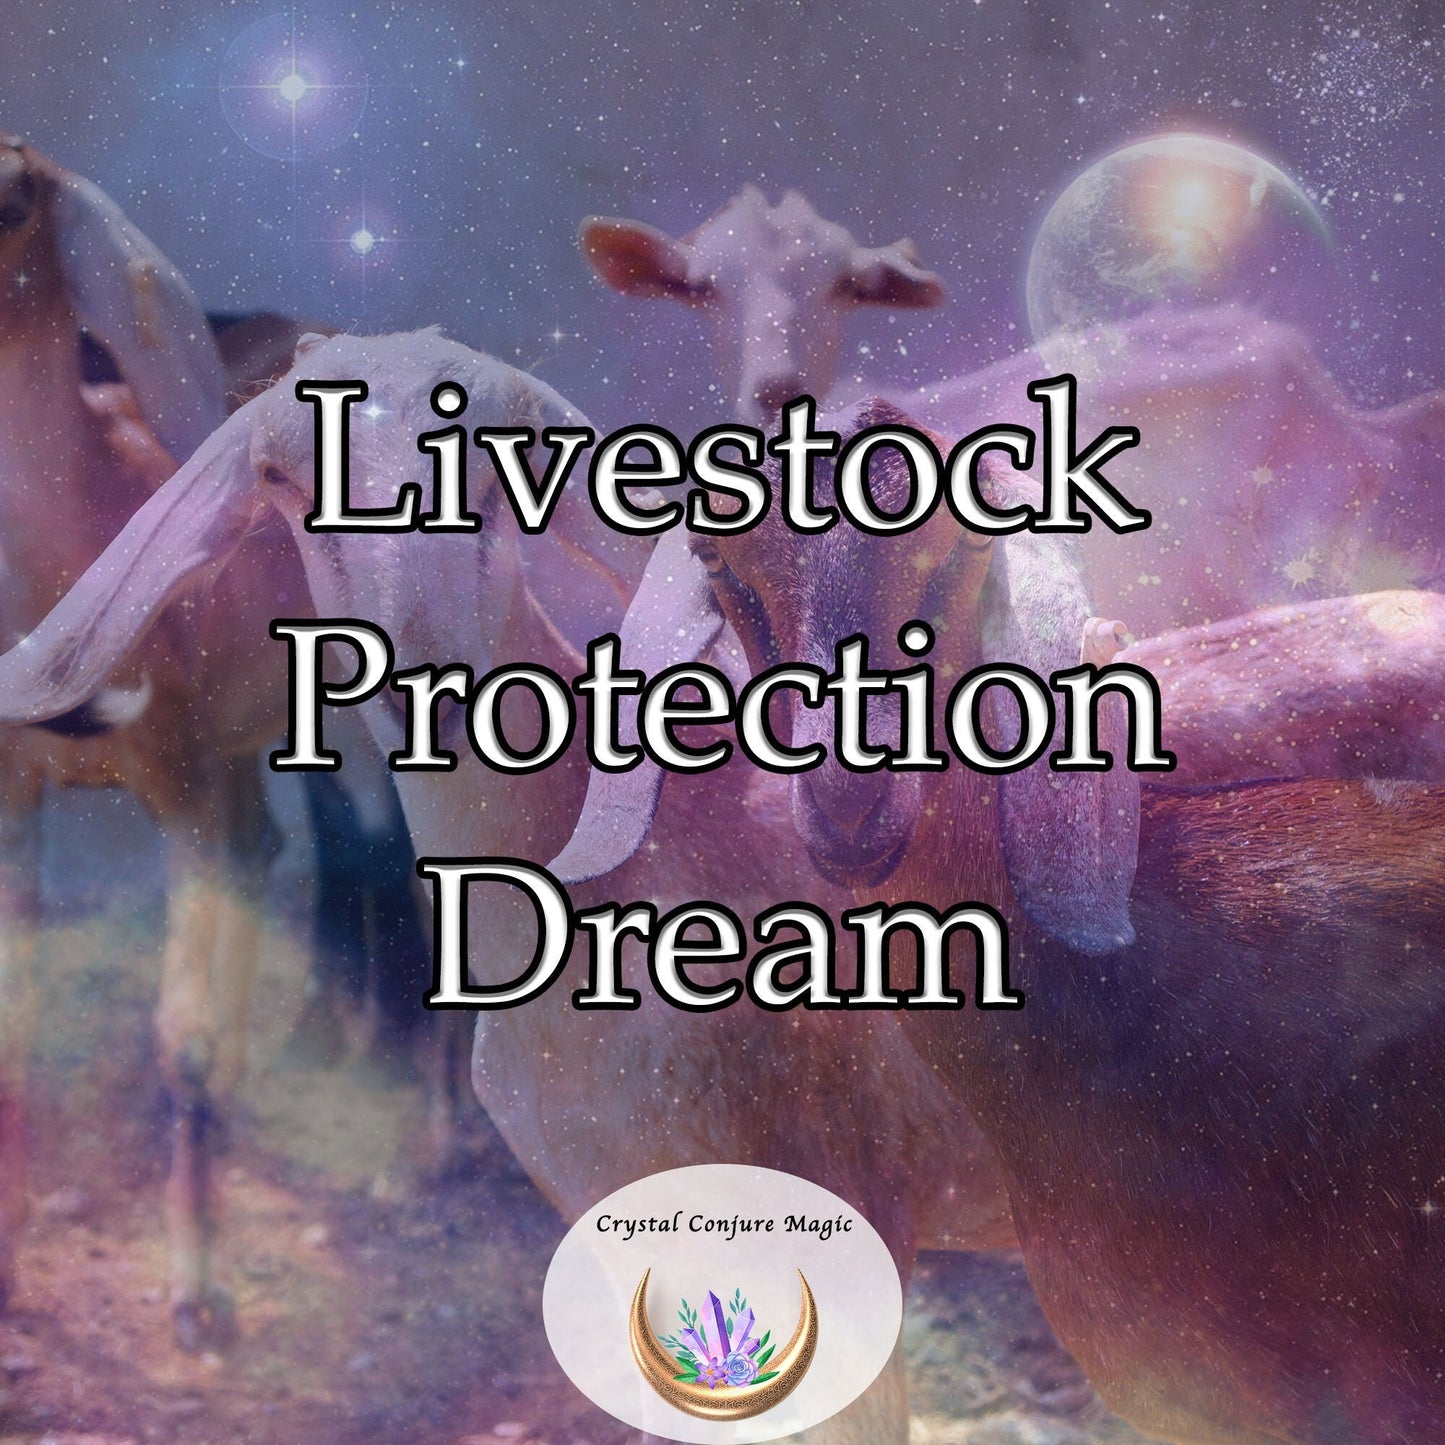 Livestock Protection Dream - help safeguard your animals from harm and ill intentions